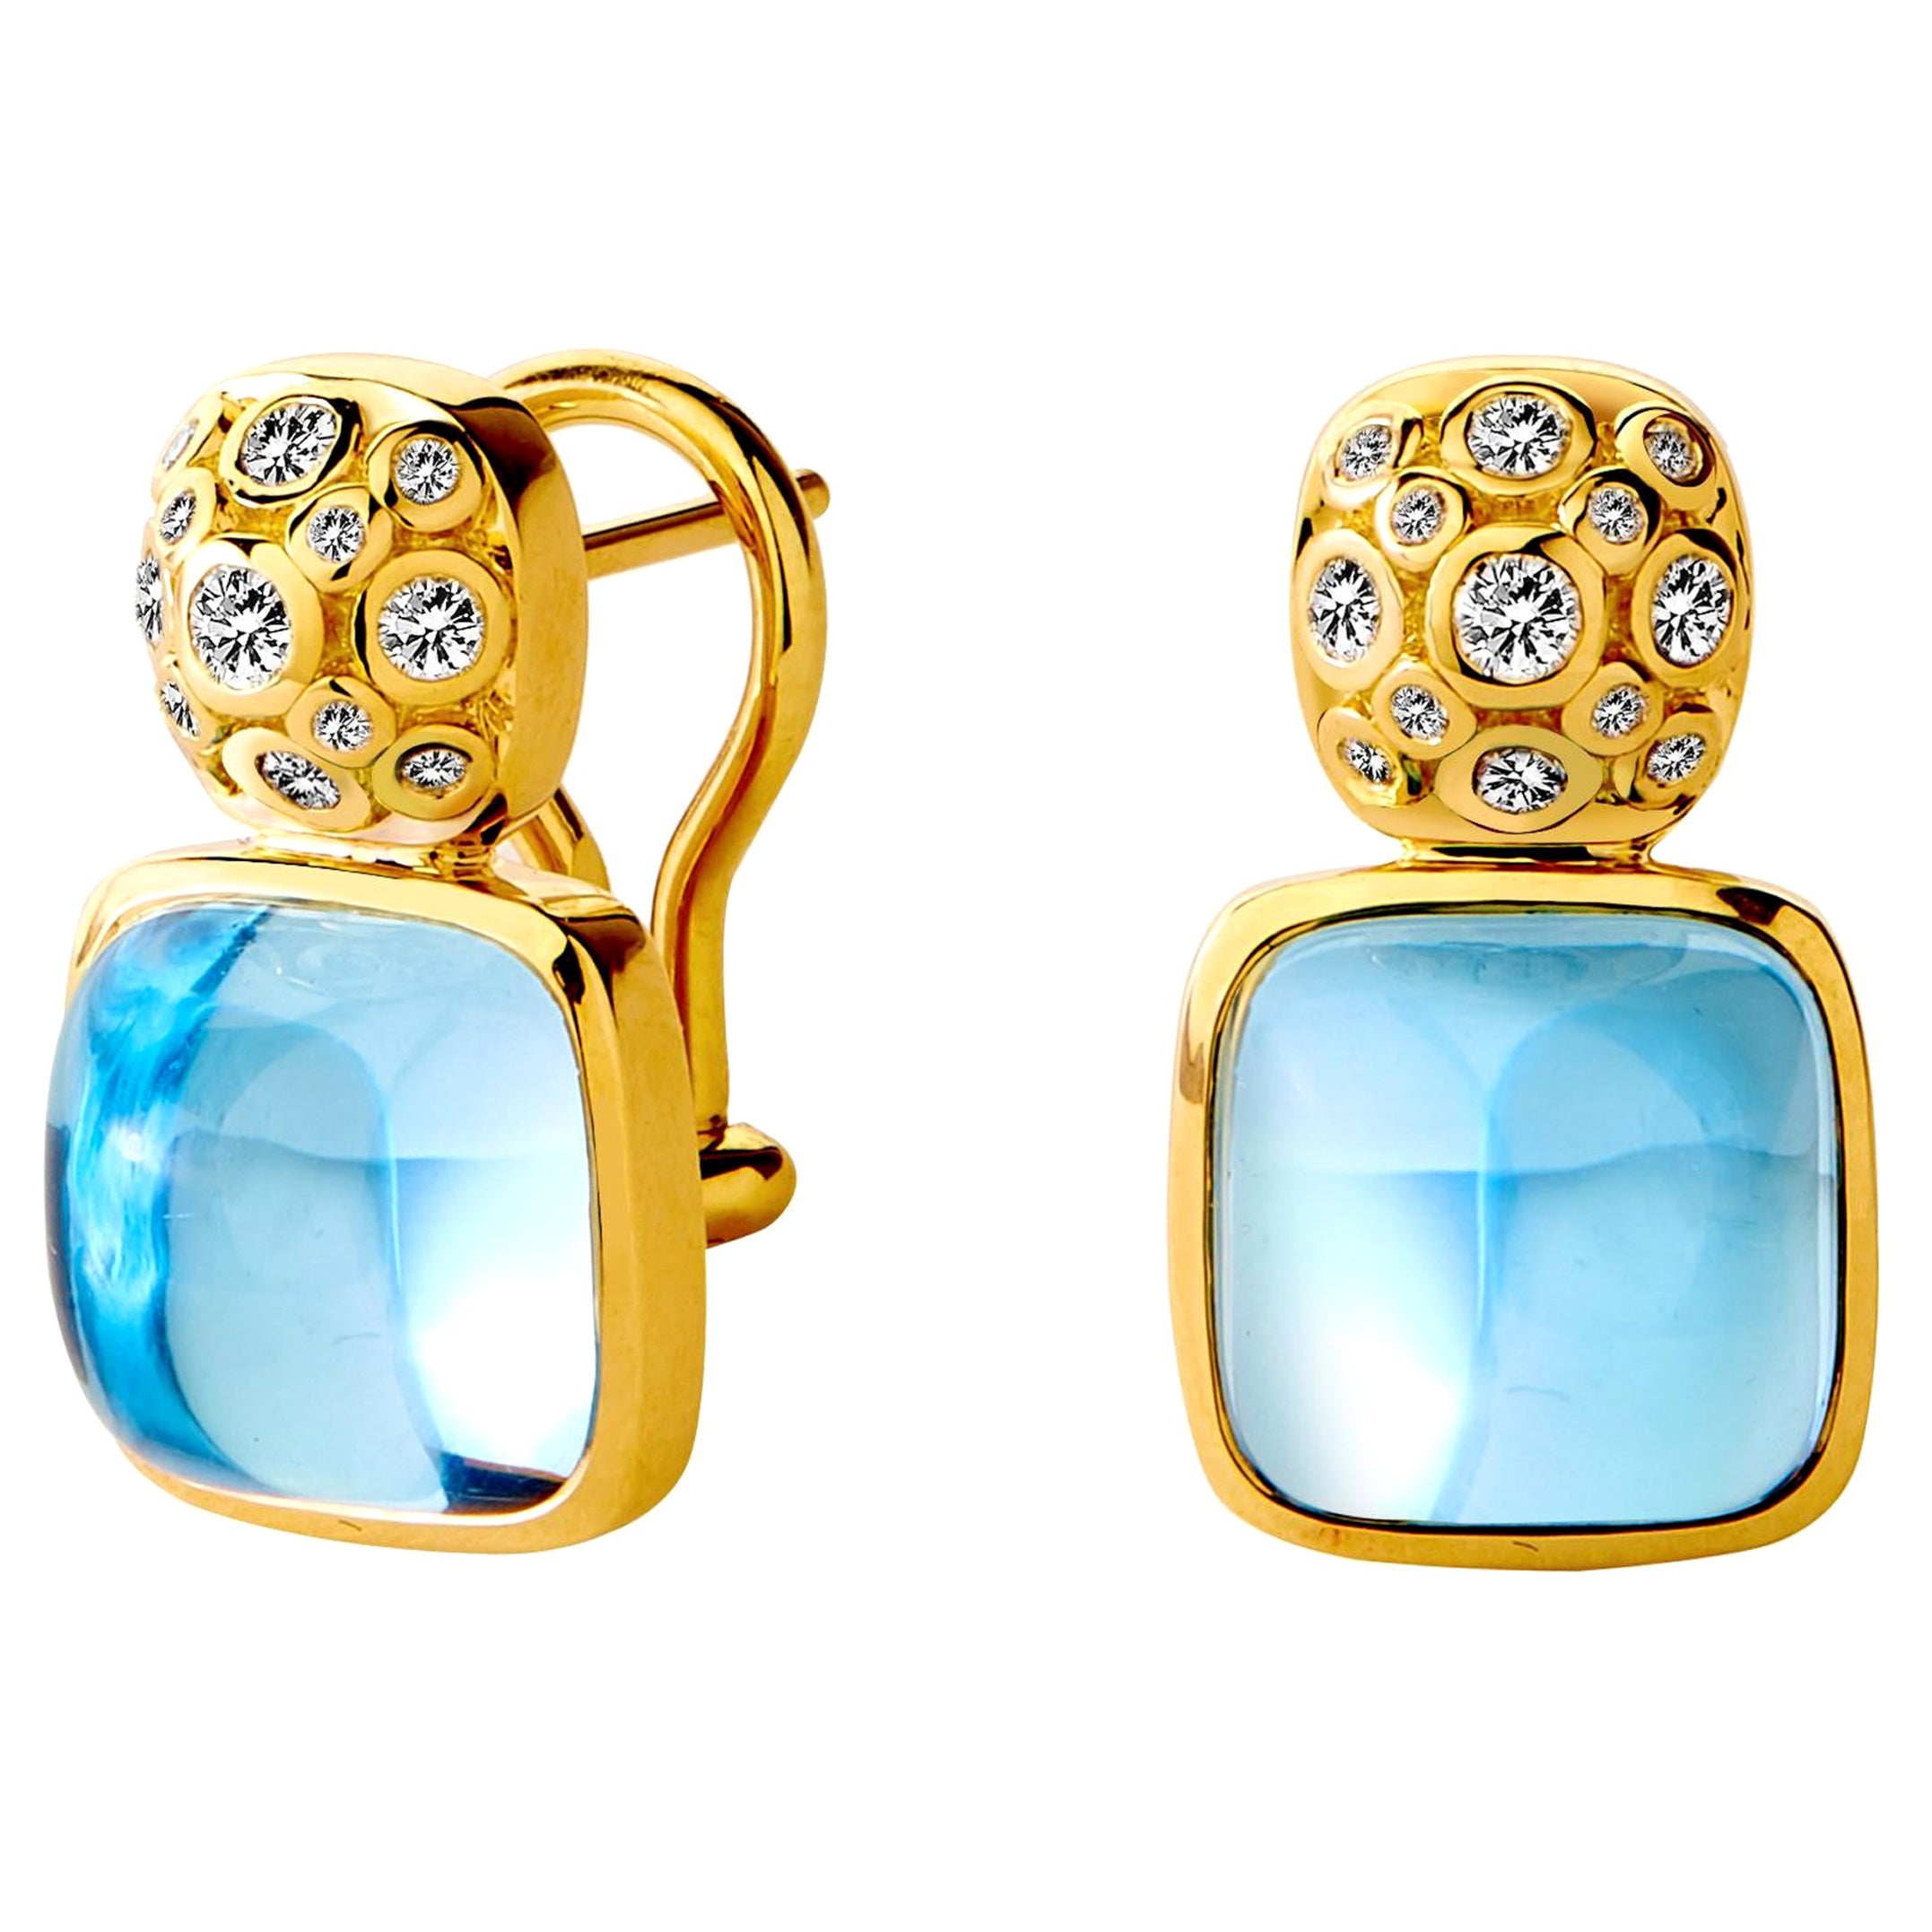 Syna Yellow Gold Earrings with Blue Topaz and Diamonds